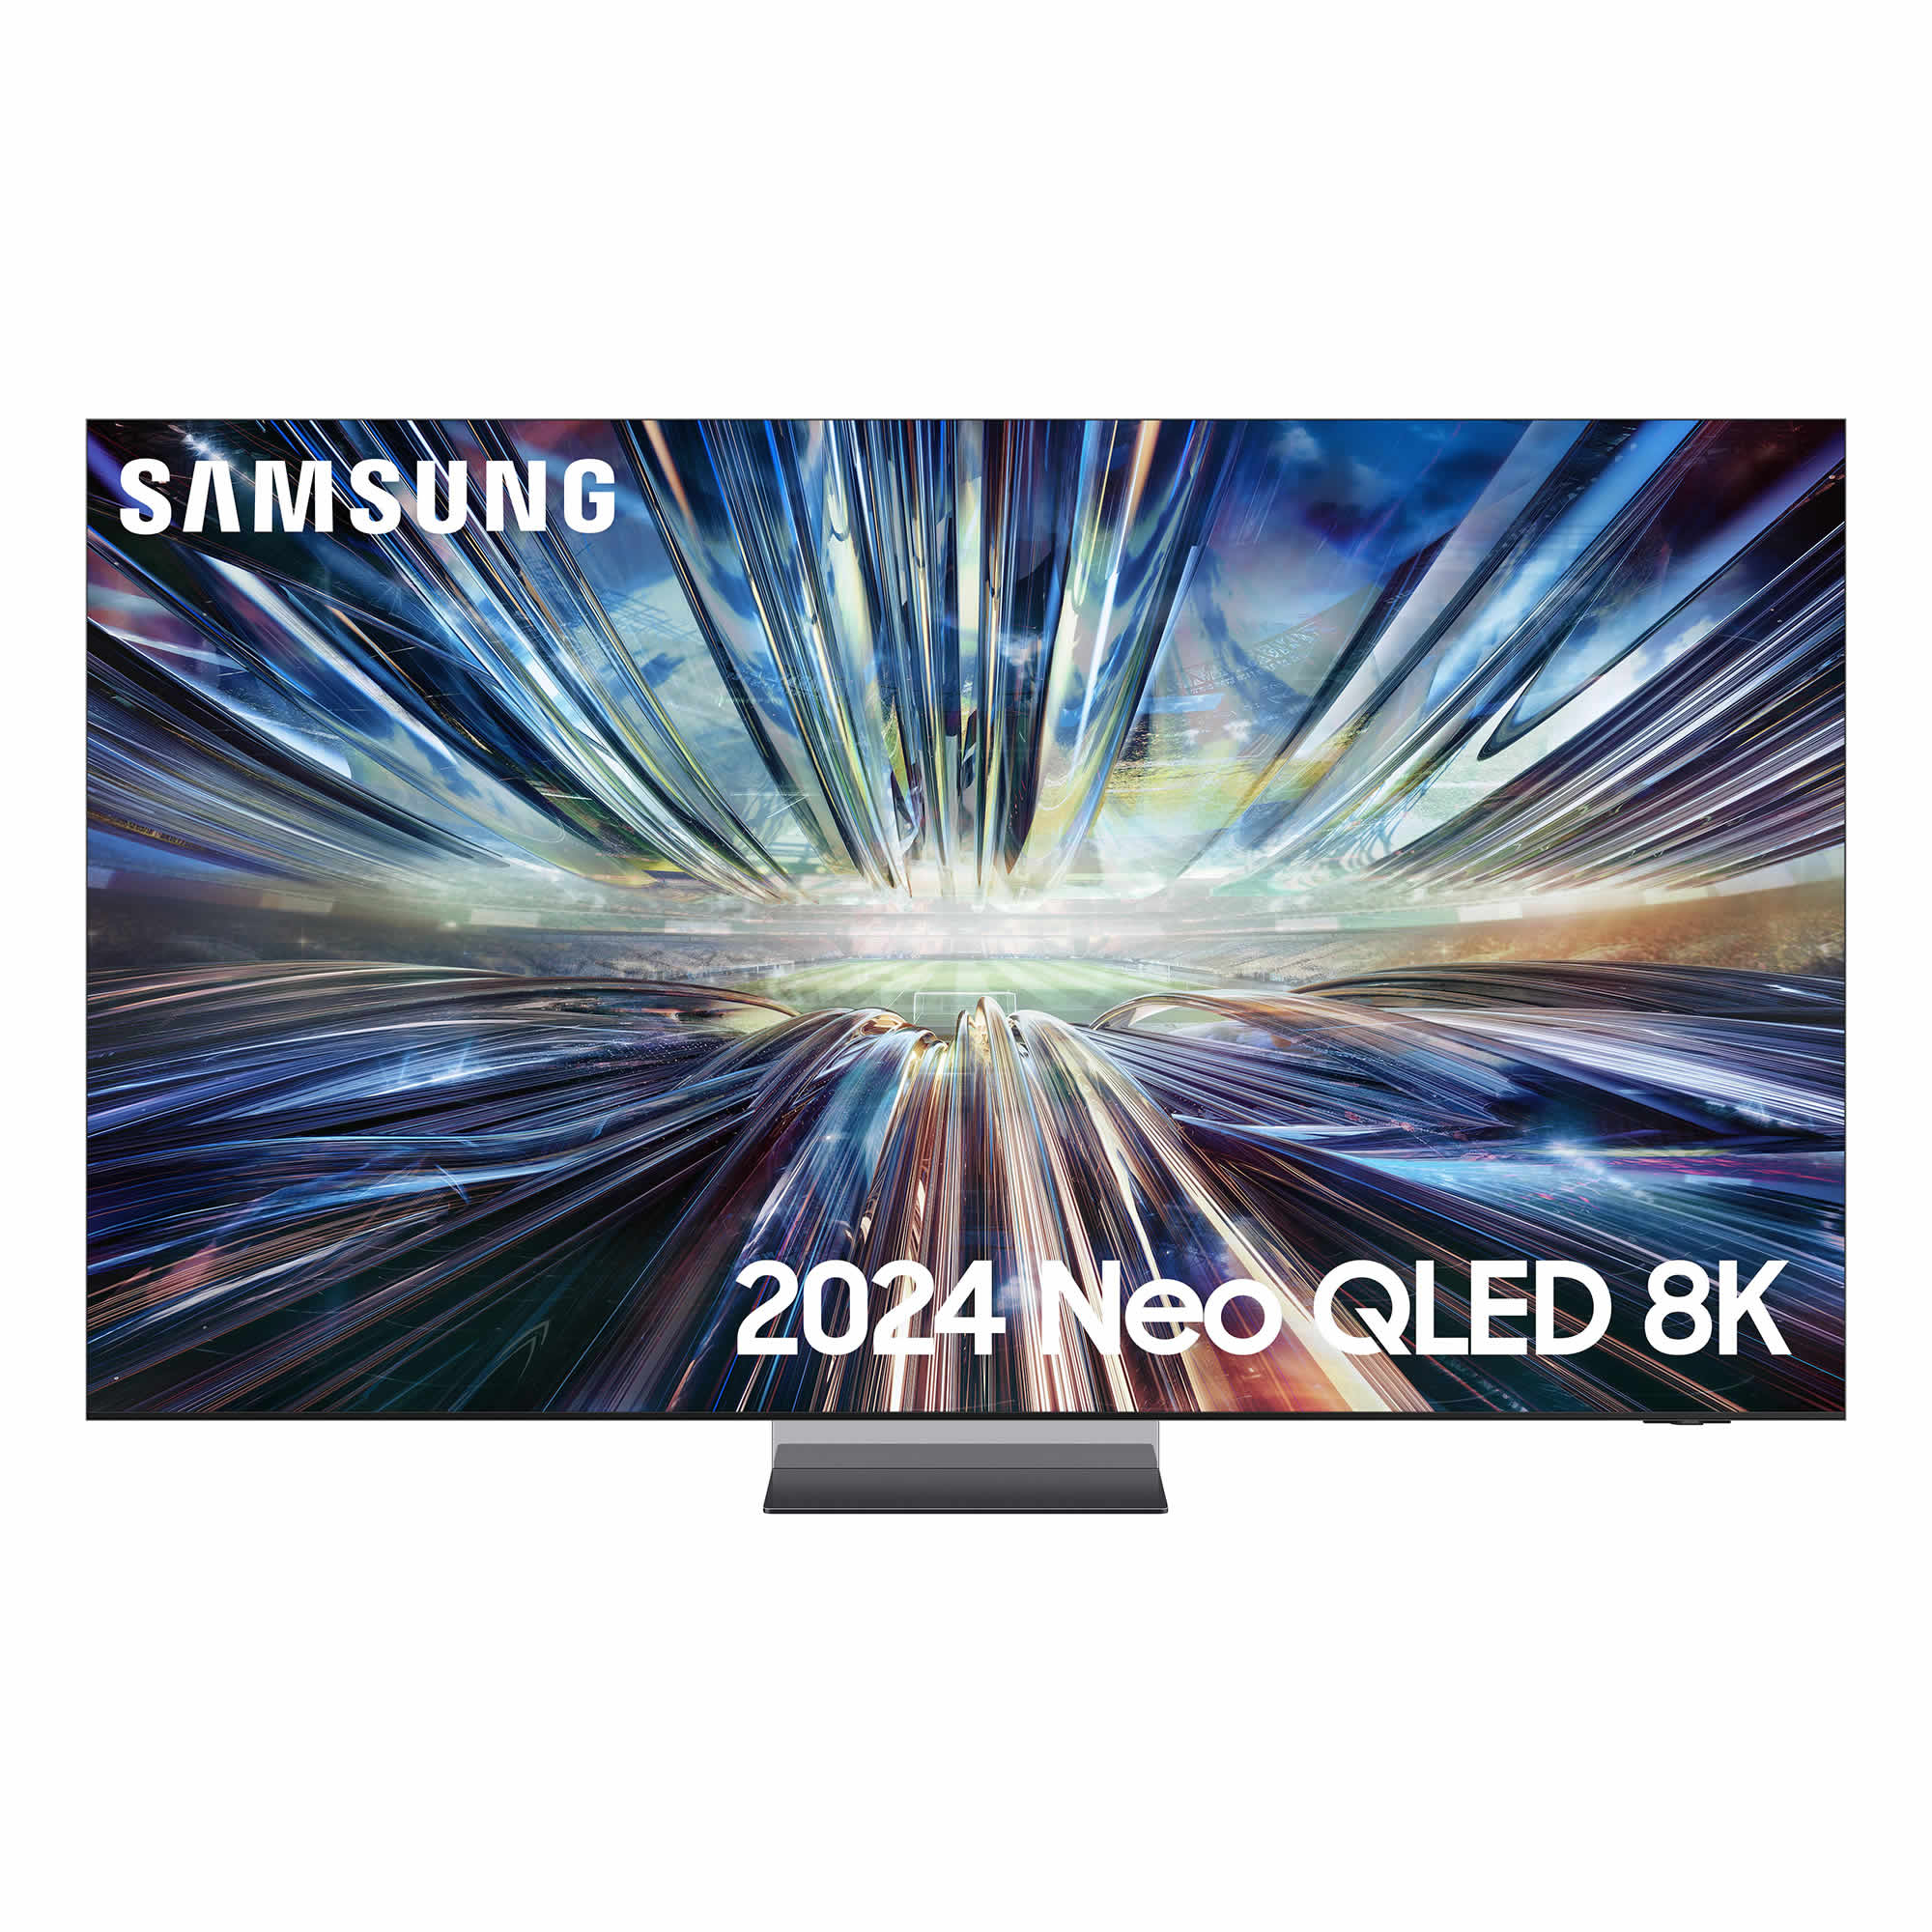 Samsung 85inch Neo QLED UHD 8K One Connect Box SMART TV WiFi